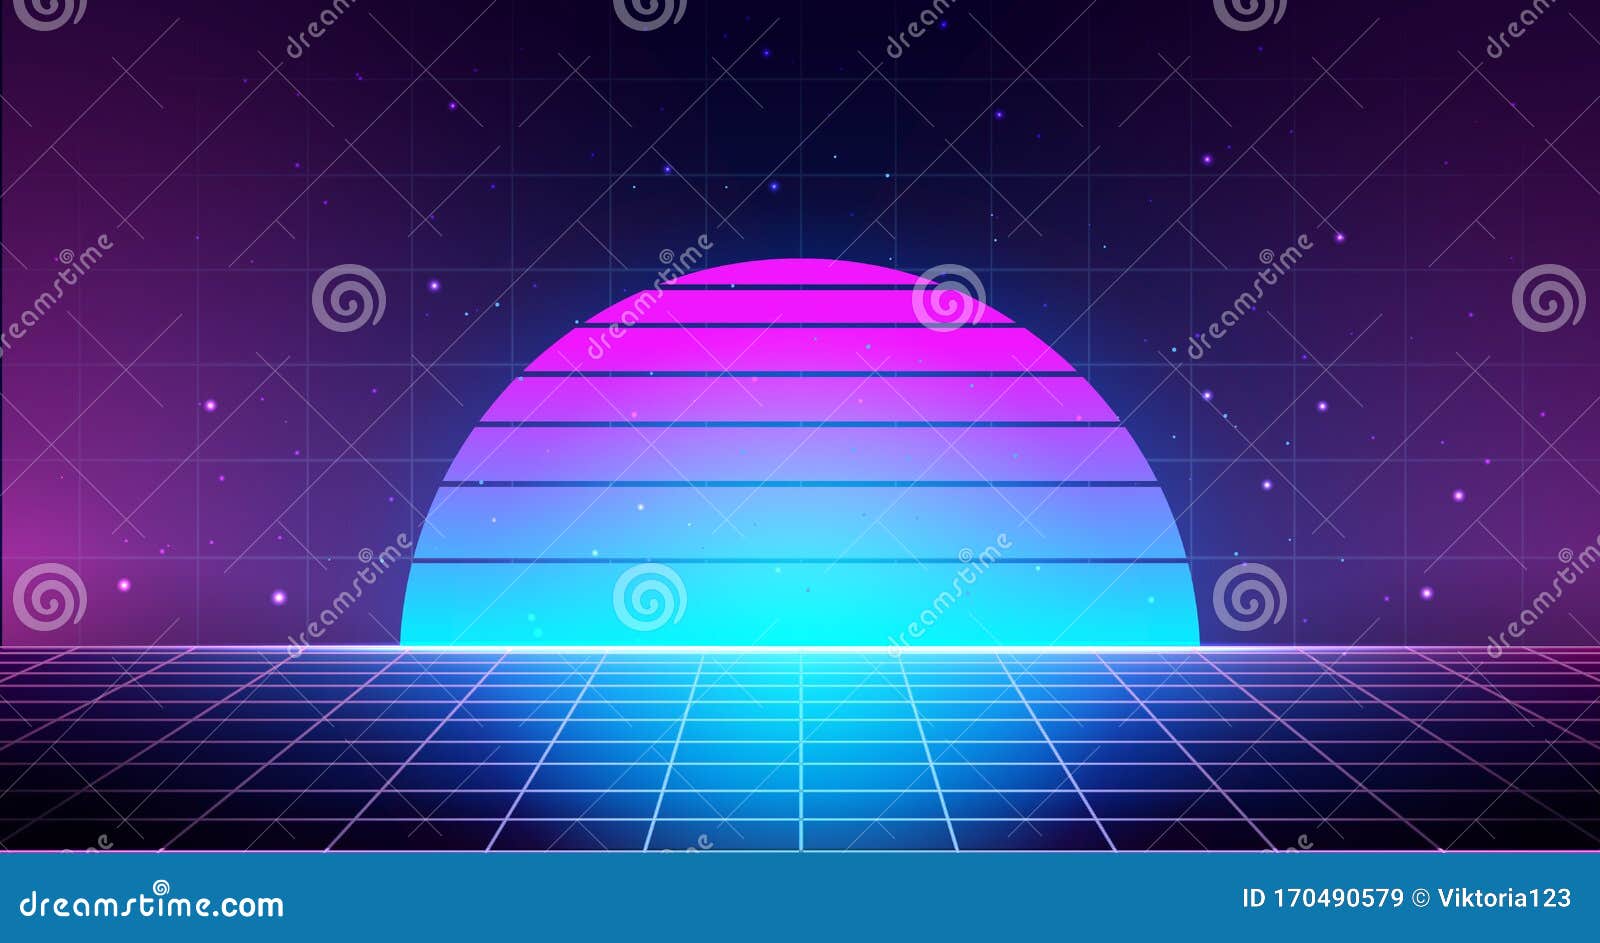 retro background with laser grid, abstract landscape with sunset and star sky. vaporwave, synthwave 80s cyberpunk style